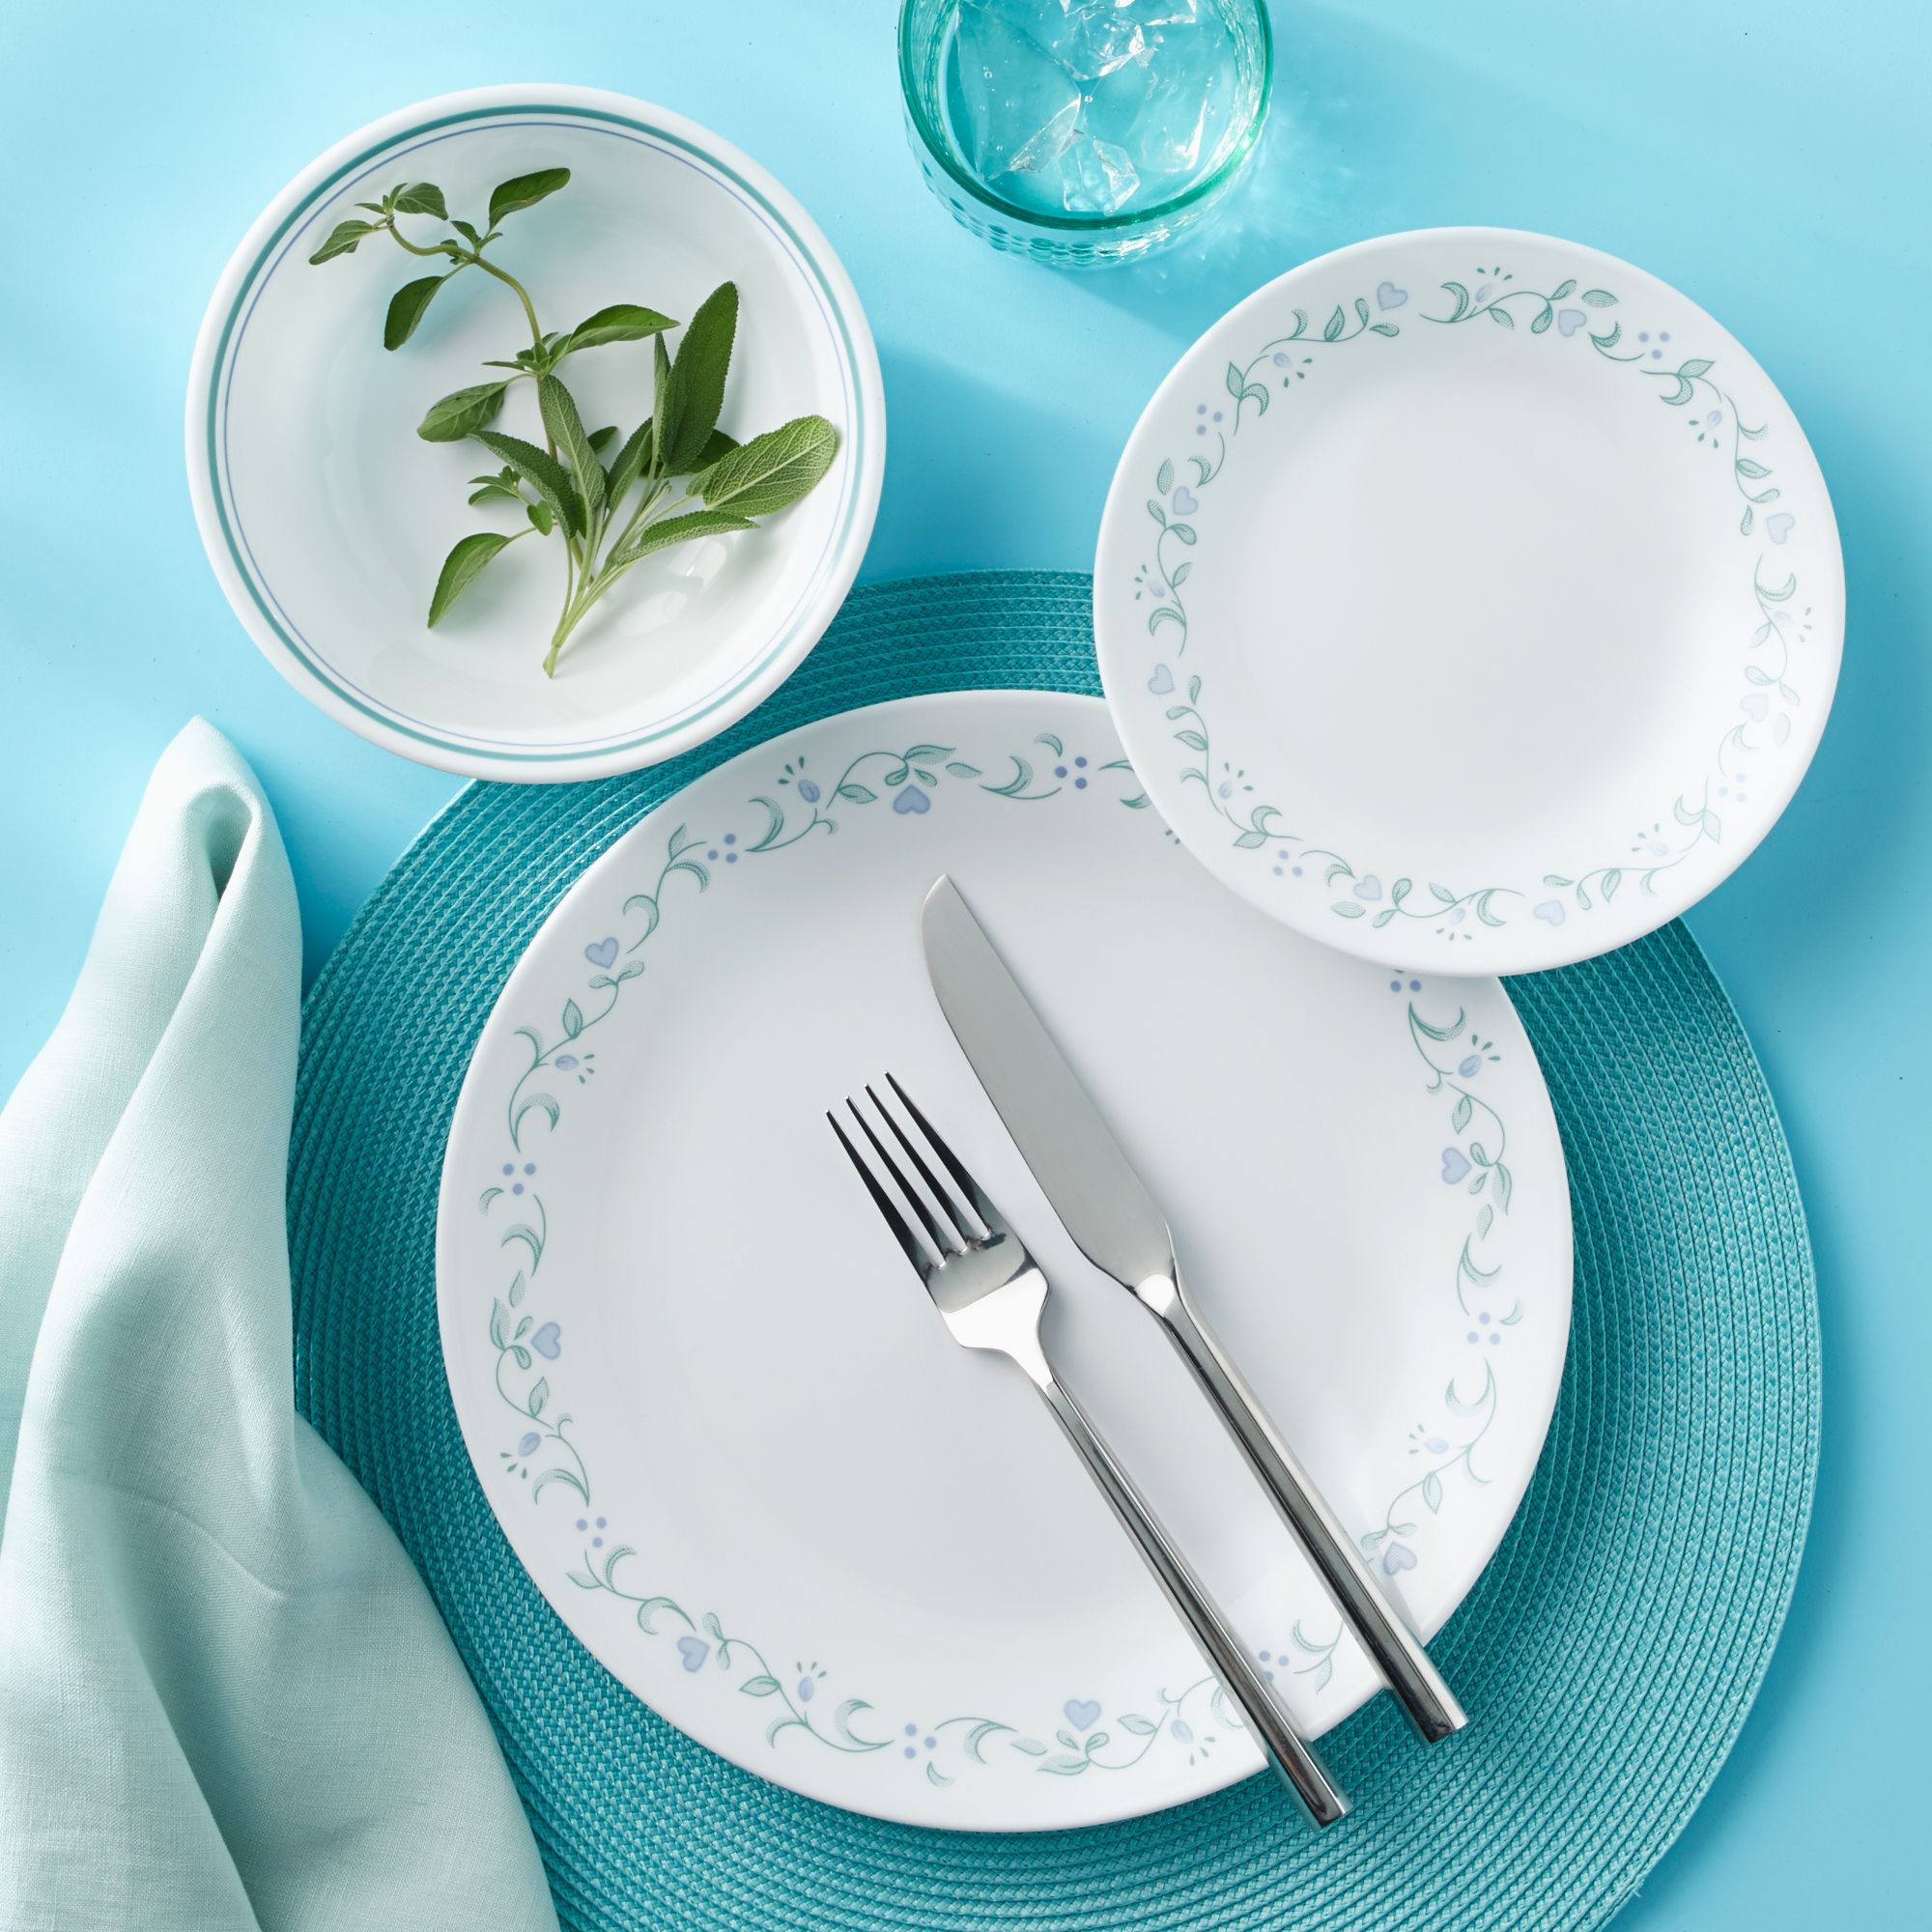 Corelle Classic Country Cottage 16-Piece Dinnerware Set, White, Blue - image 3 of 4